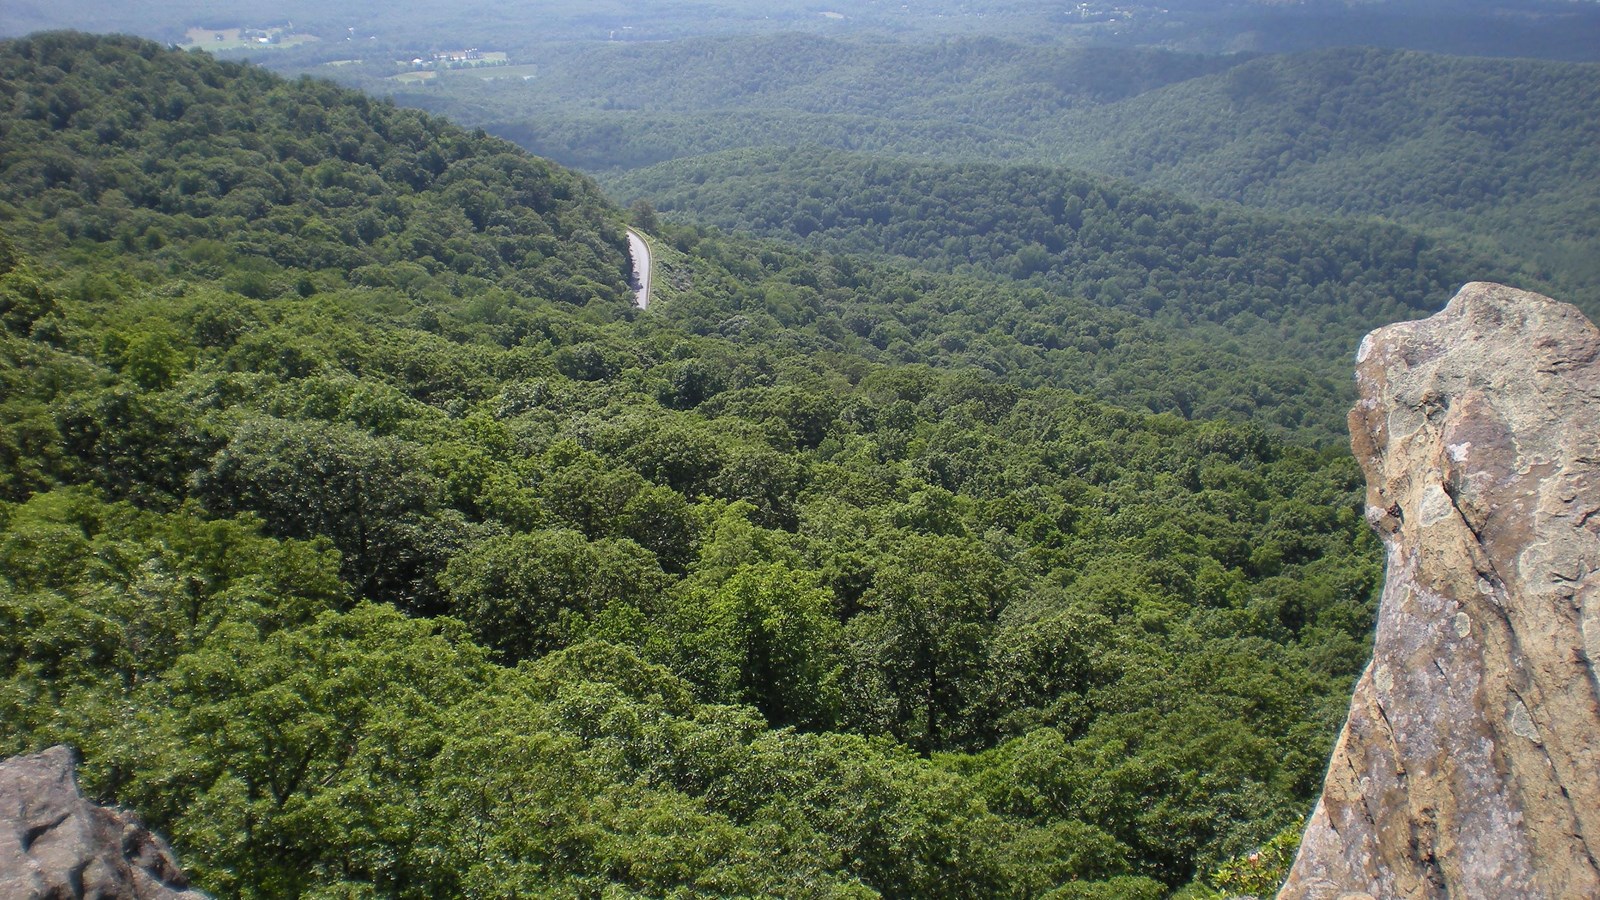 A forested valley stretches below a rocky outcrop, with patches of cleared farmland in the distance